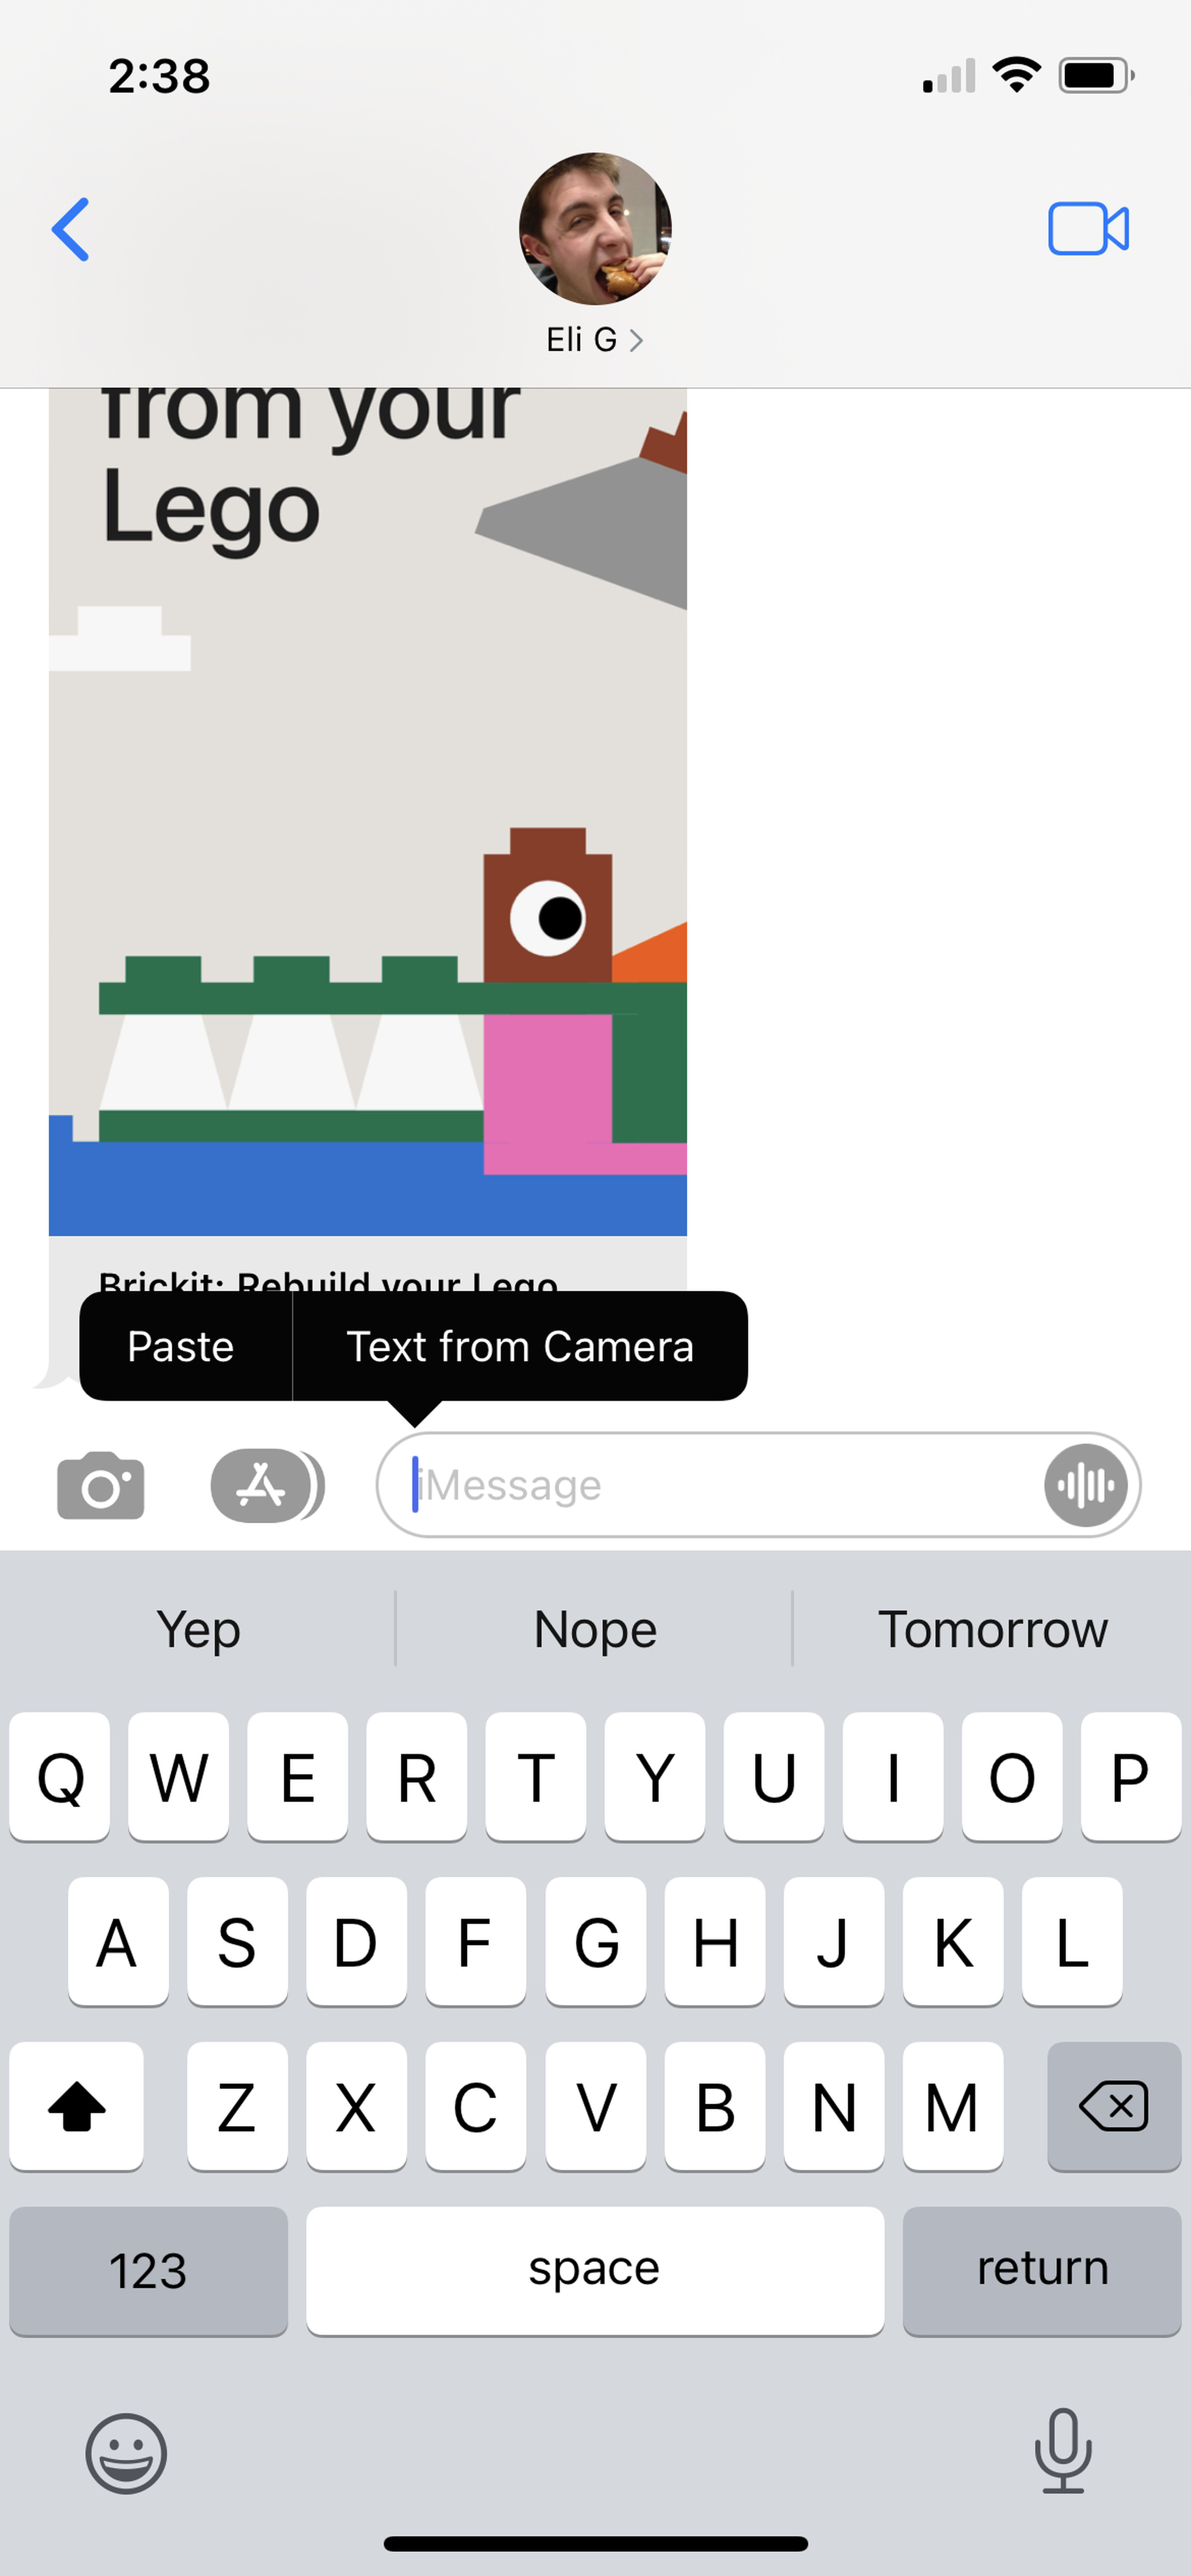 The new “Text from Camera” option in the text select menu.